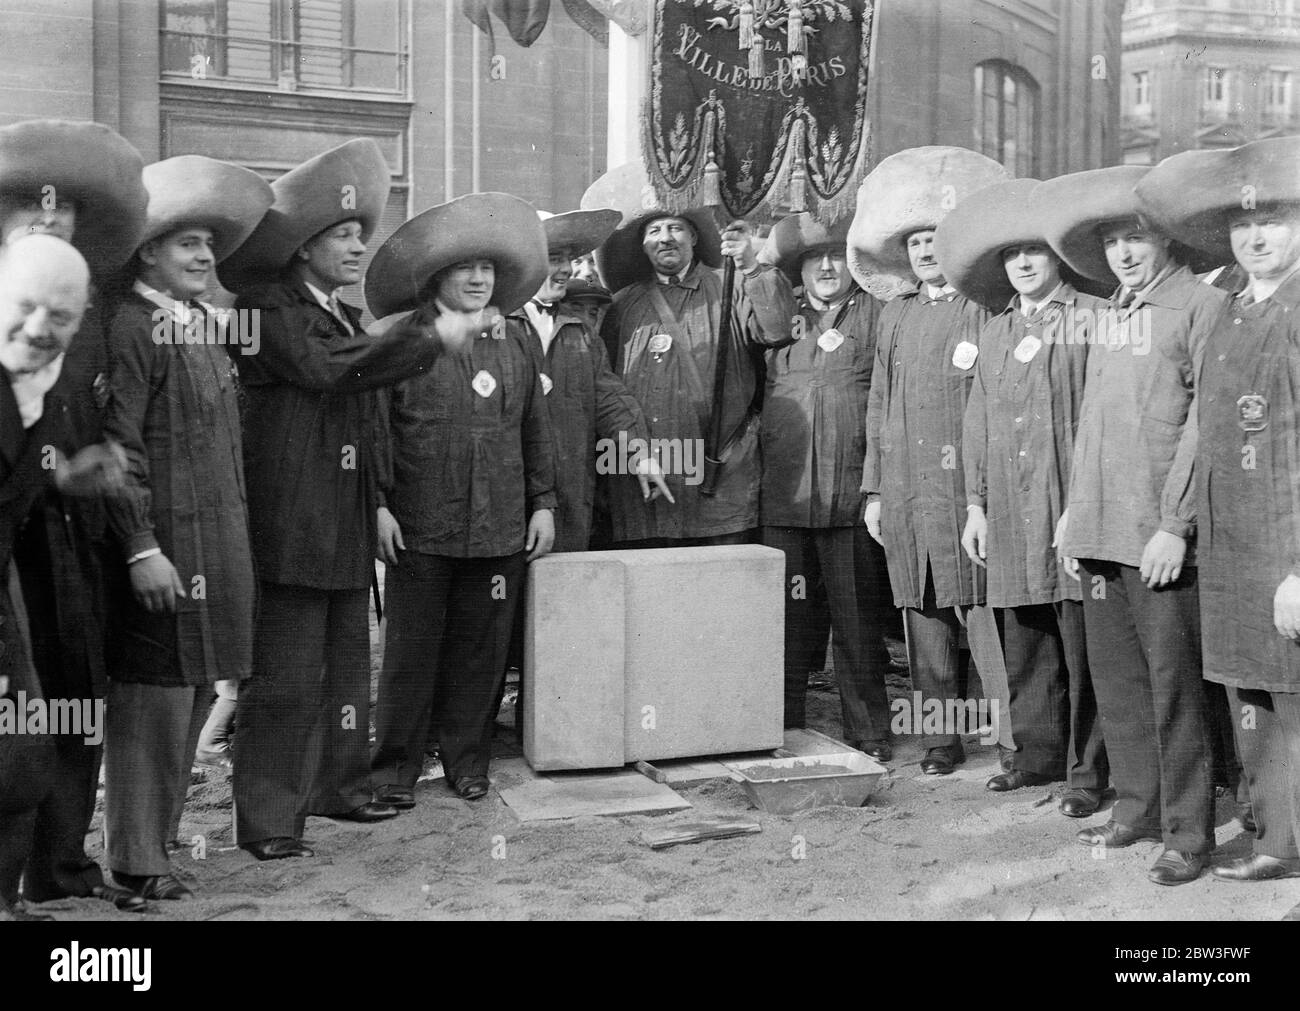 Picturesque ceremony in Paris market . A thousand homeless persons were fed following the laying of the corner stone for a new market building at Les Halles , Paris . Photo shows , market porters in their large hats at the ceremony . 3 February 1935 Stock Photo